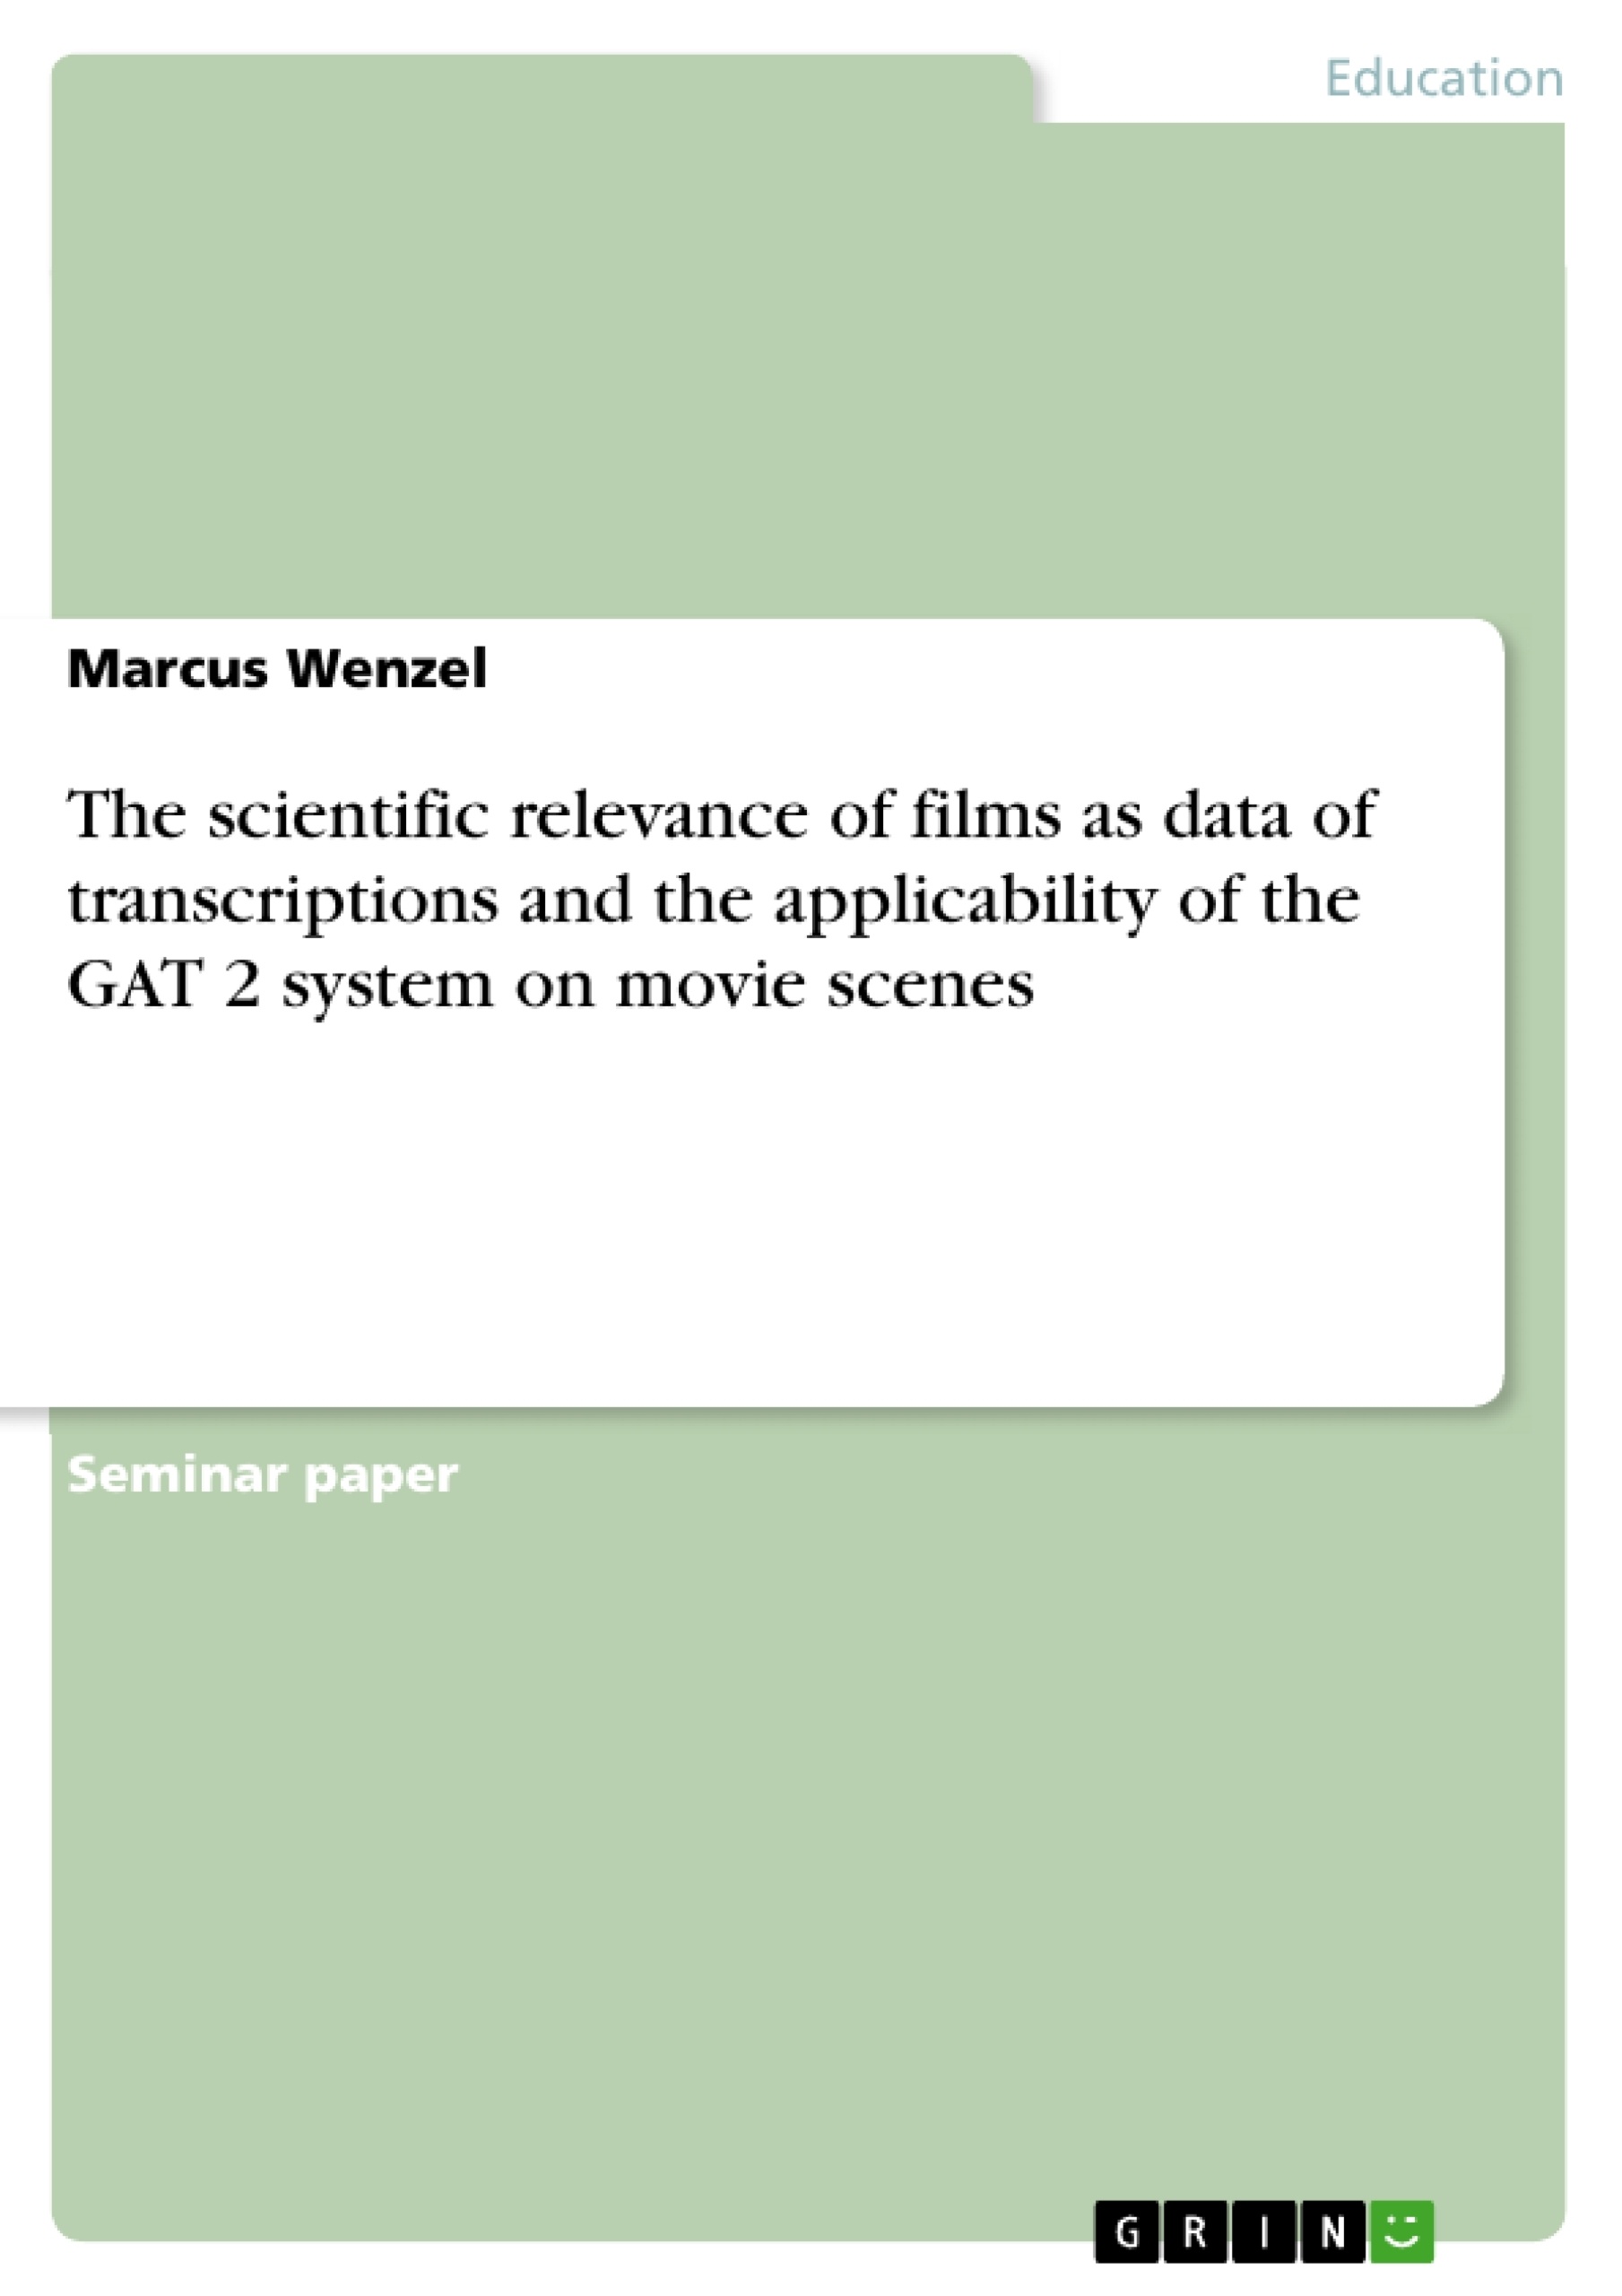 Título: The scientific relevance of films as data of transcriptions and the applicability of the GAT 2 system on movie scenes